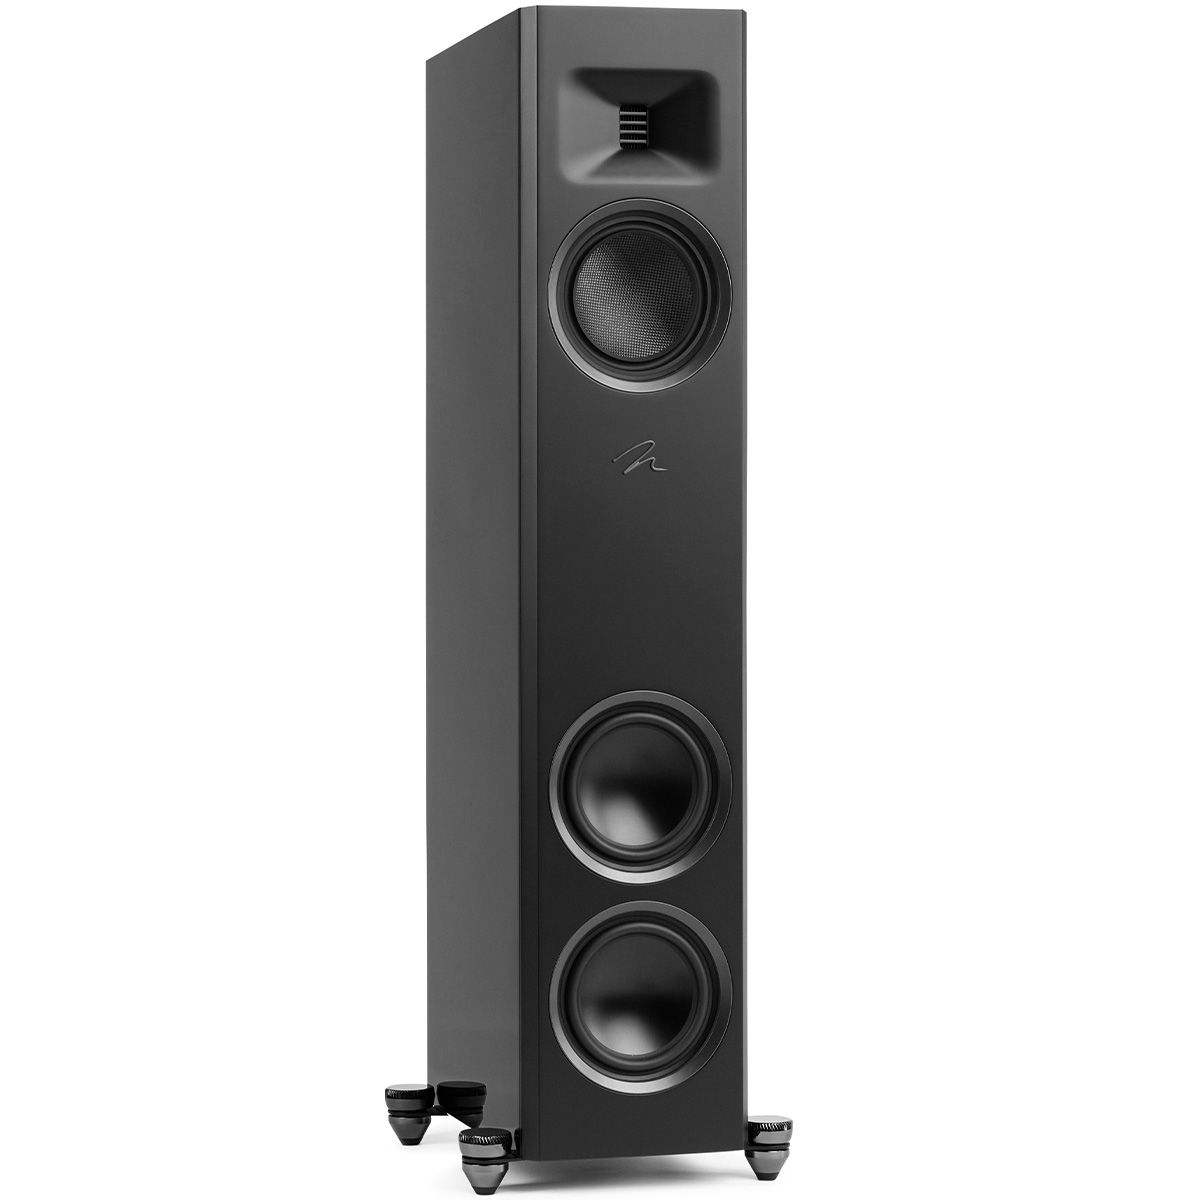 MartinLogan Motion XT F10  Floorstanding Speaker in black, angled view without grilles on white background